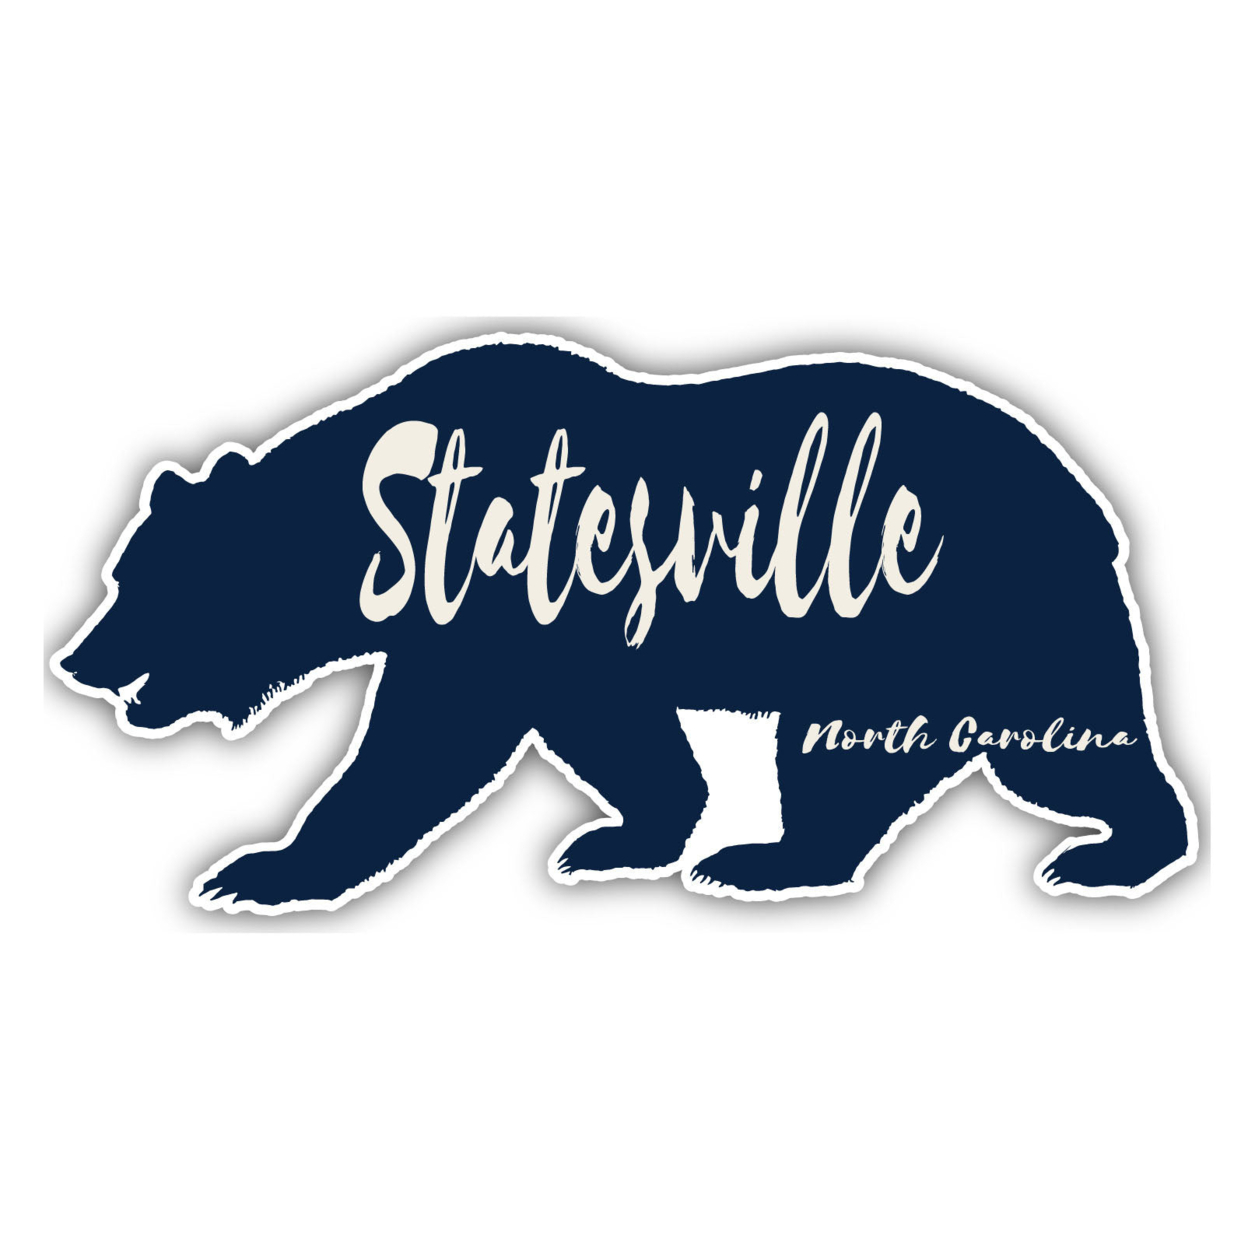 Statesville North Carolina Souvenir Decorative Stickers (Choose Theme And Size) - Single Unit, 2-Inch, Great Outdoors